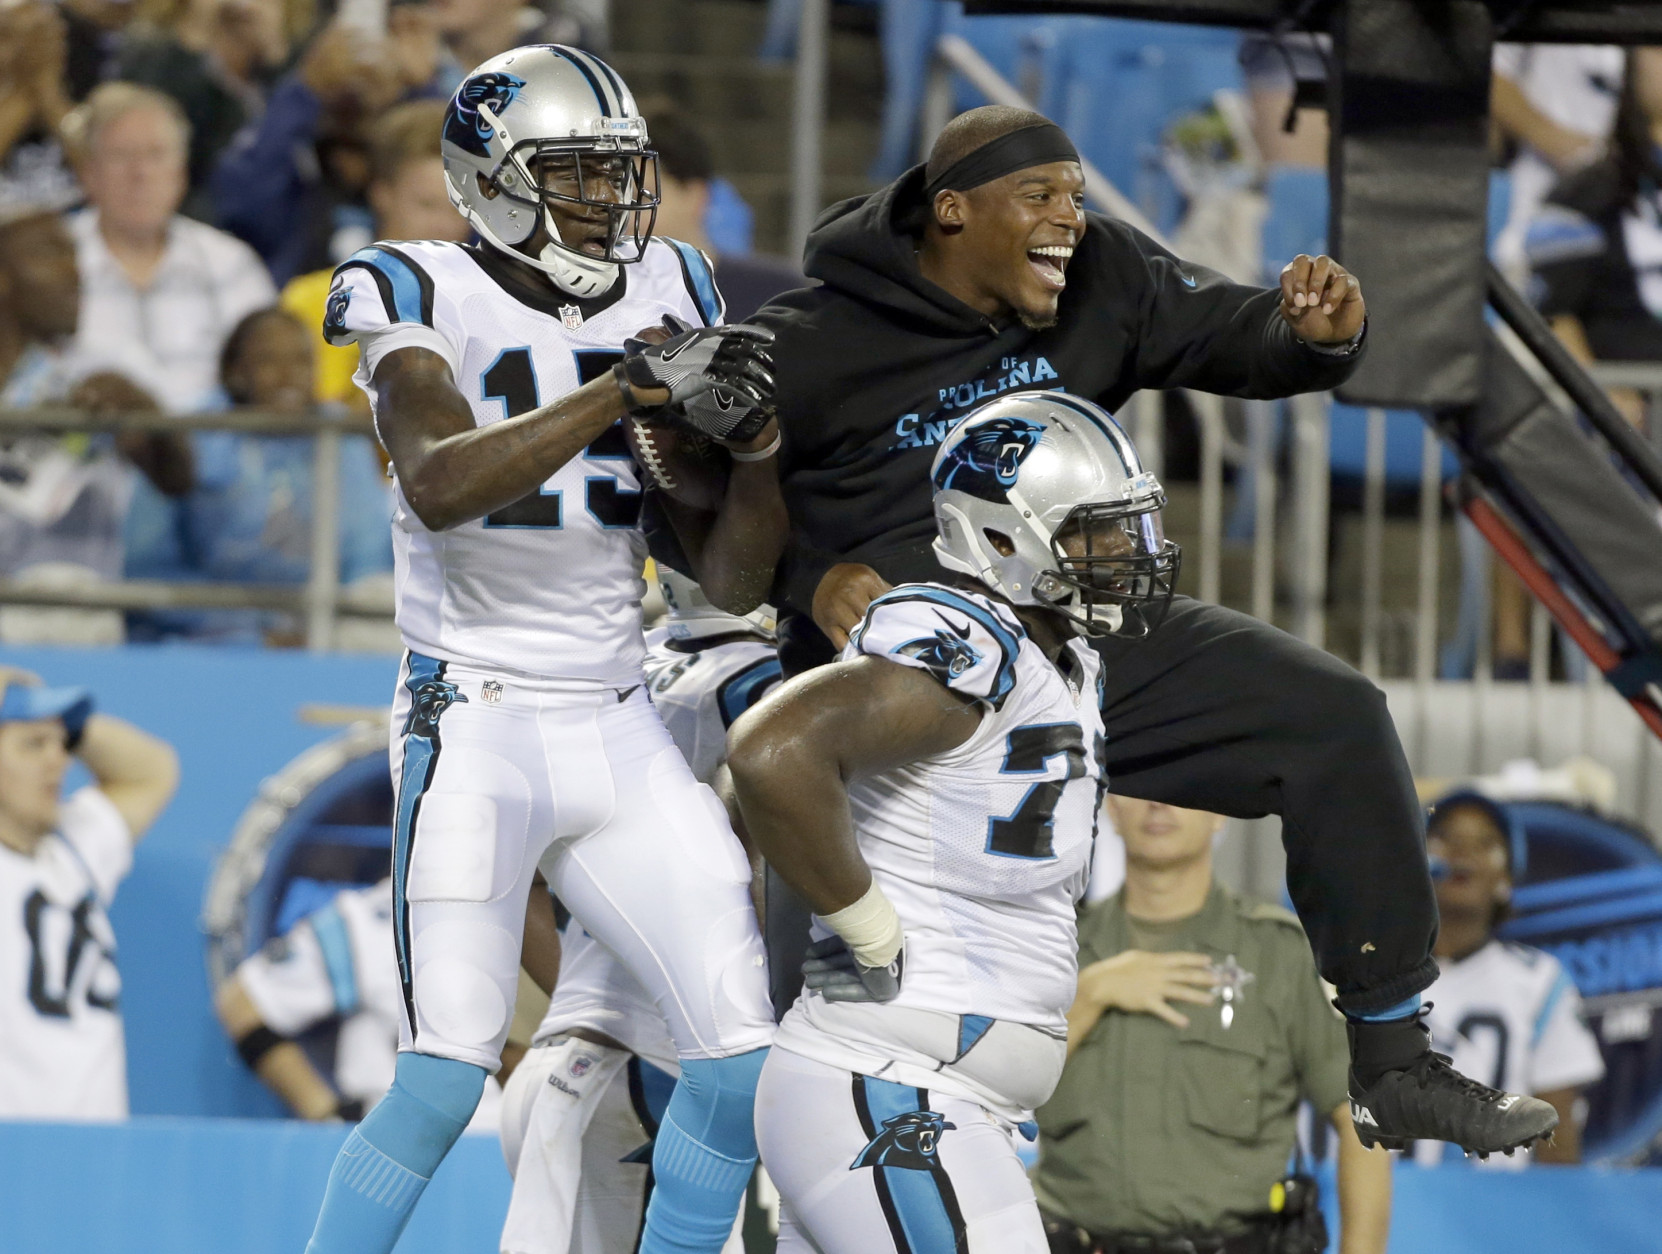 Carolina Panthers' Cam Newton, right, celebrates with Keyarris Garrett (15) after a play against the Pittsburgh Steelers in the first half of a preseason NFL football game in Charlotte, N.C., Thursday, Sept. 1, 2016. (AP Photo/Bob Leverone)